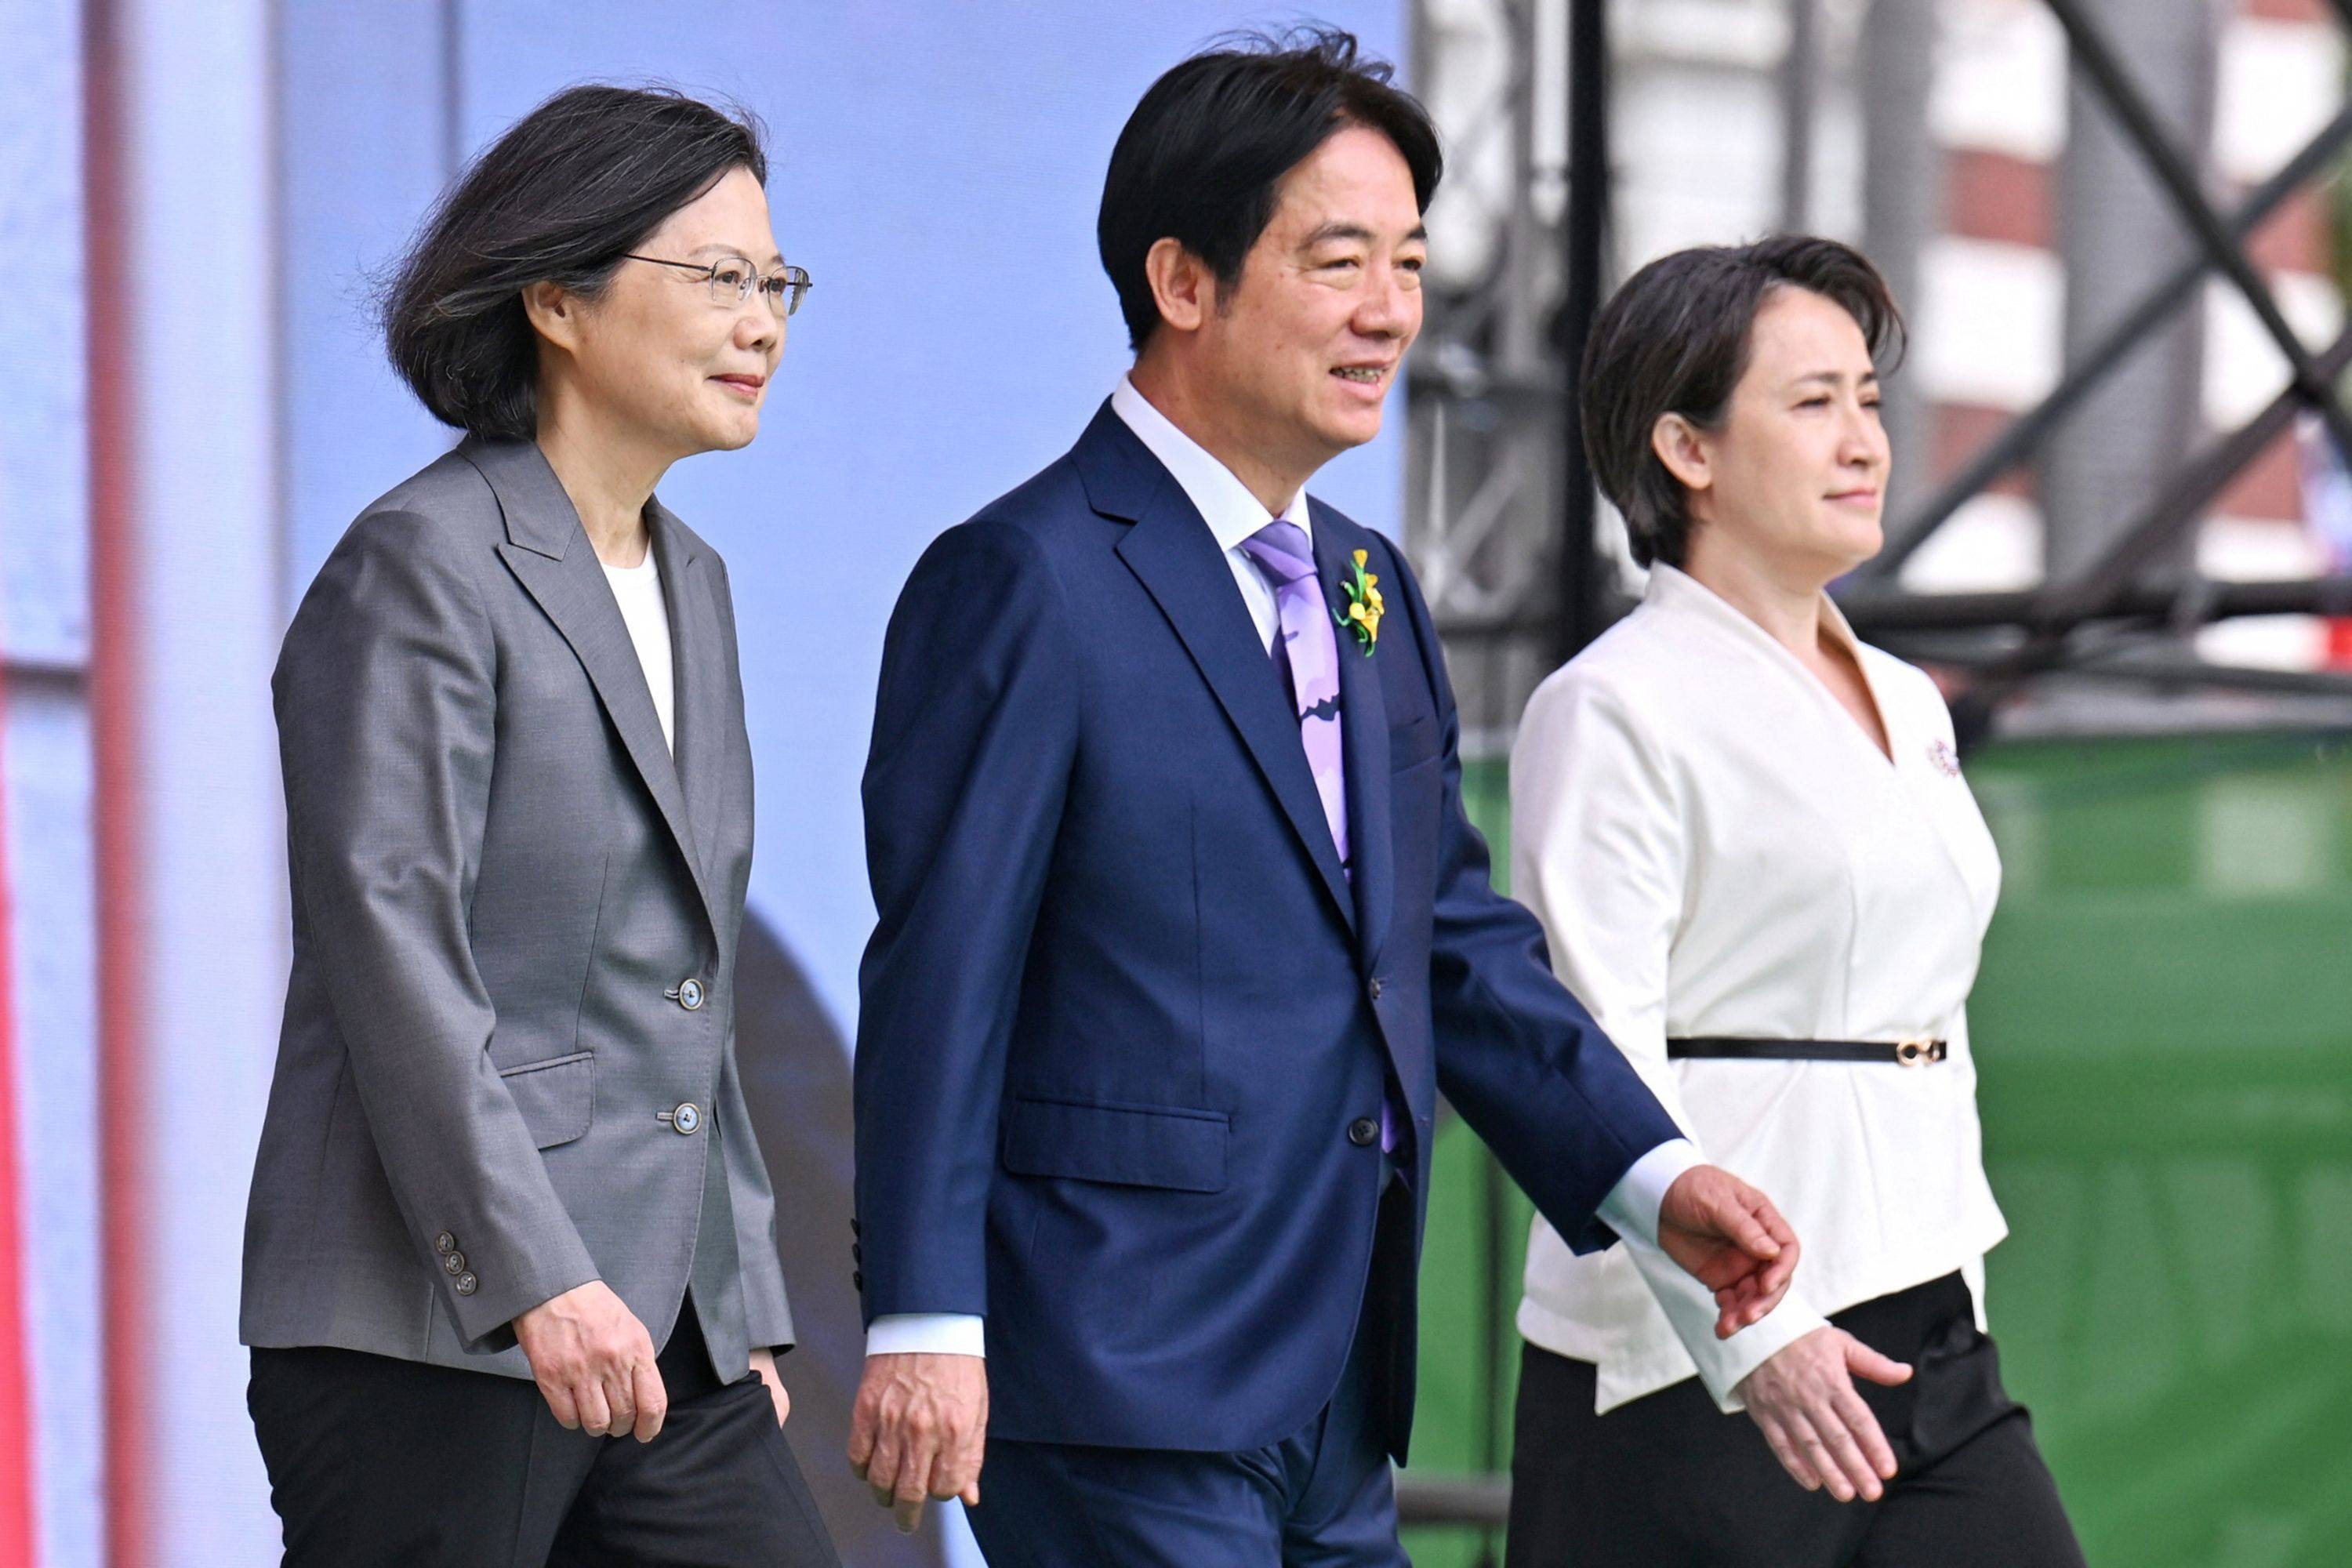 Taiwanese leader William Lai Ching-te (centre) is joined by his running mate Hsiao Bi-khim (right) and outgoing president Tsai Ing-wen (left) during his inauguration in Taipei on Monday. Photo: AFP